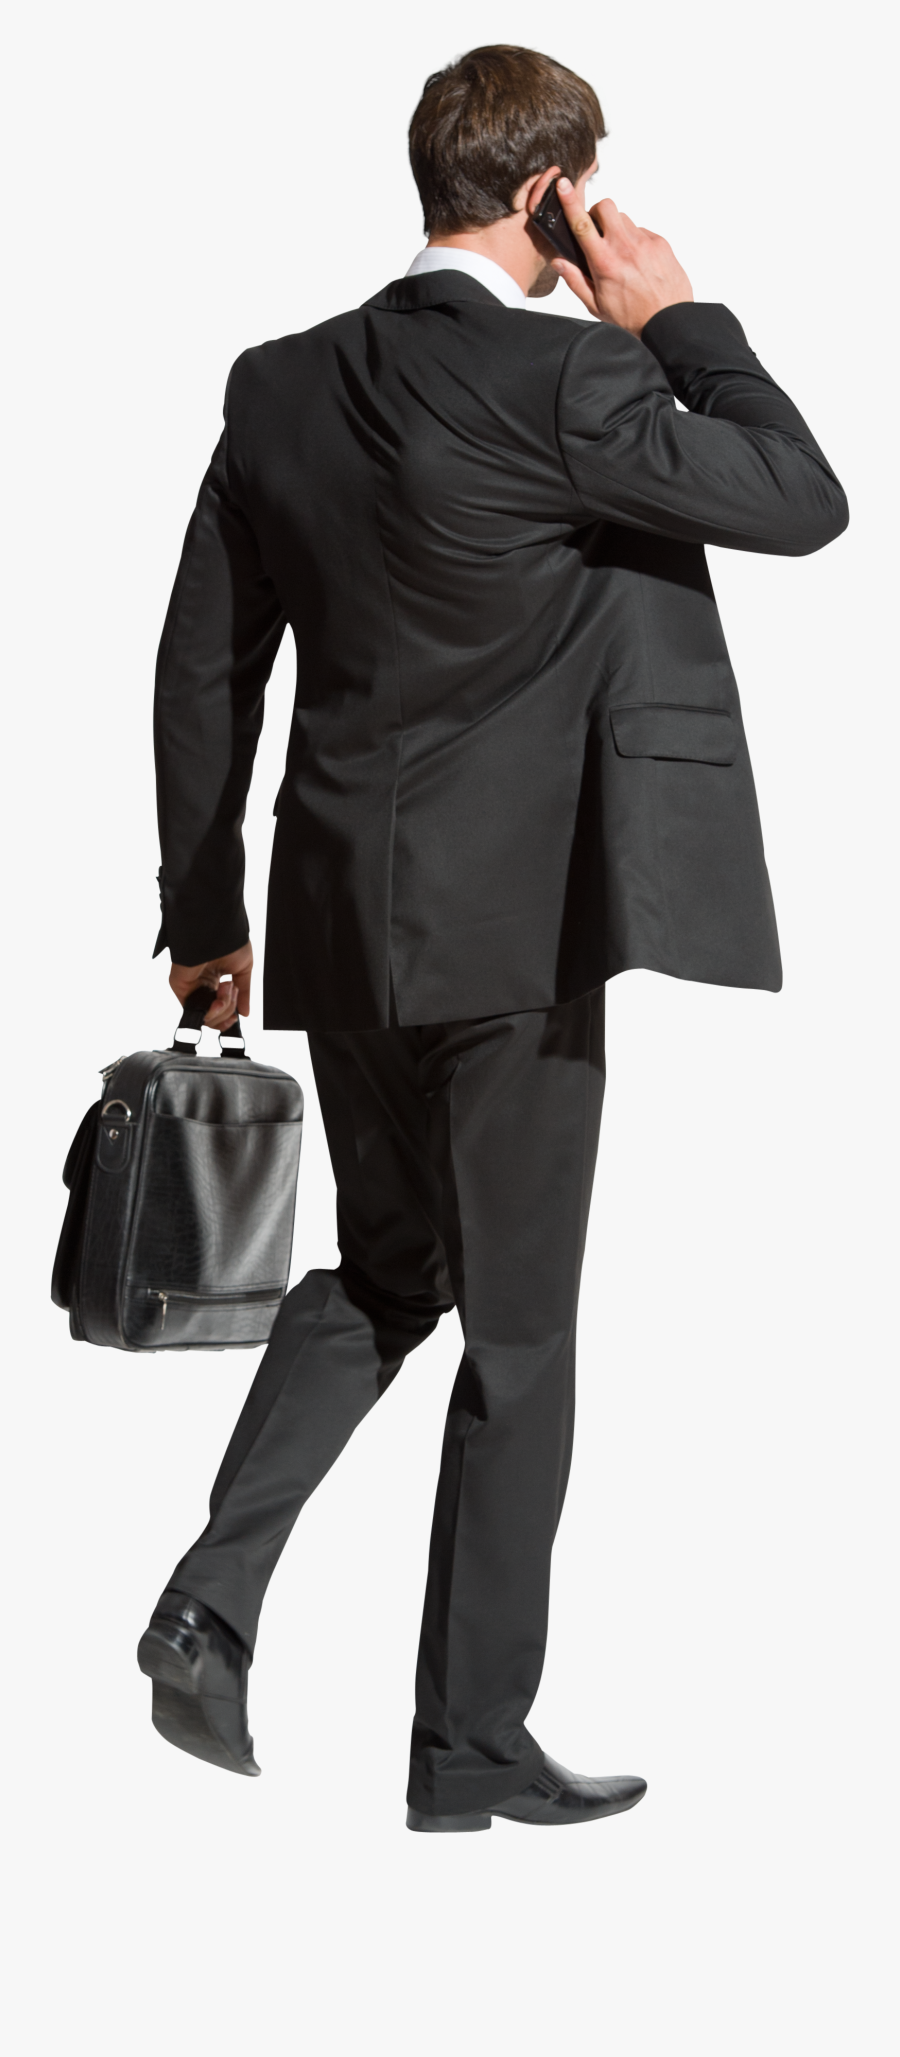 Business People Walking Png, Transparent Clipart